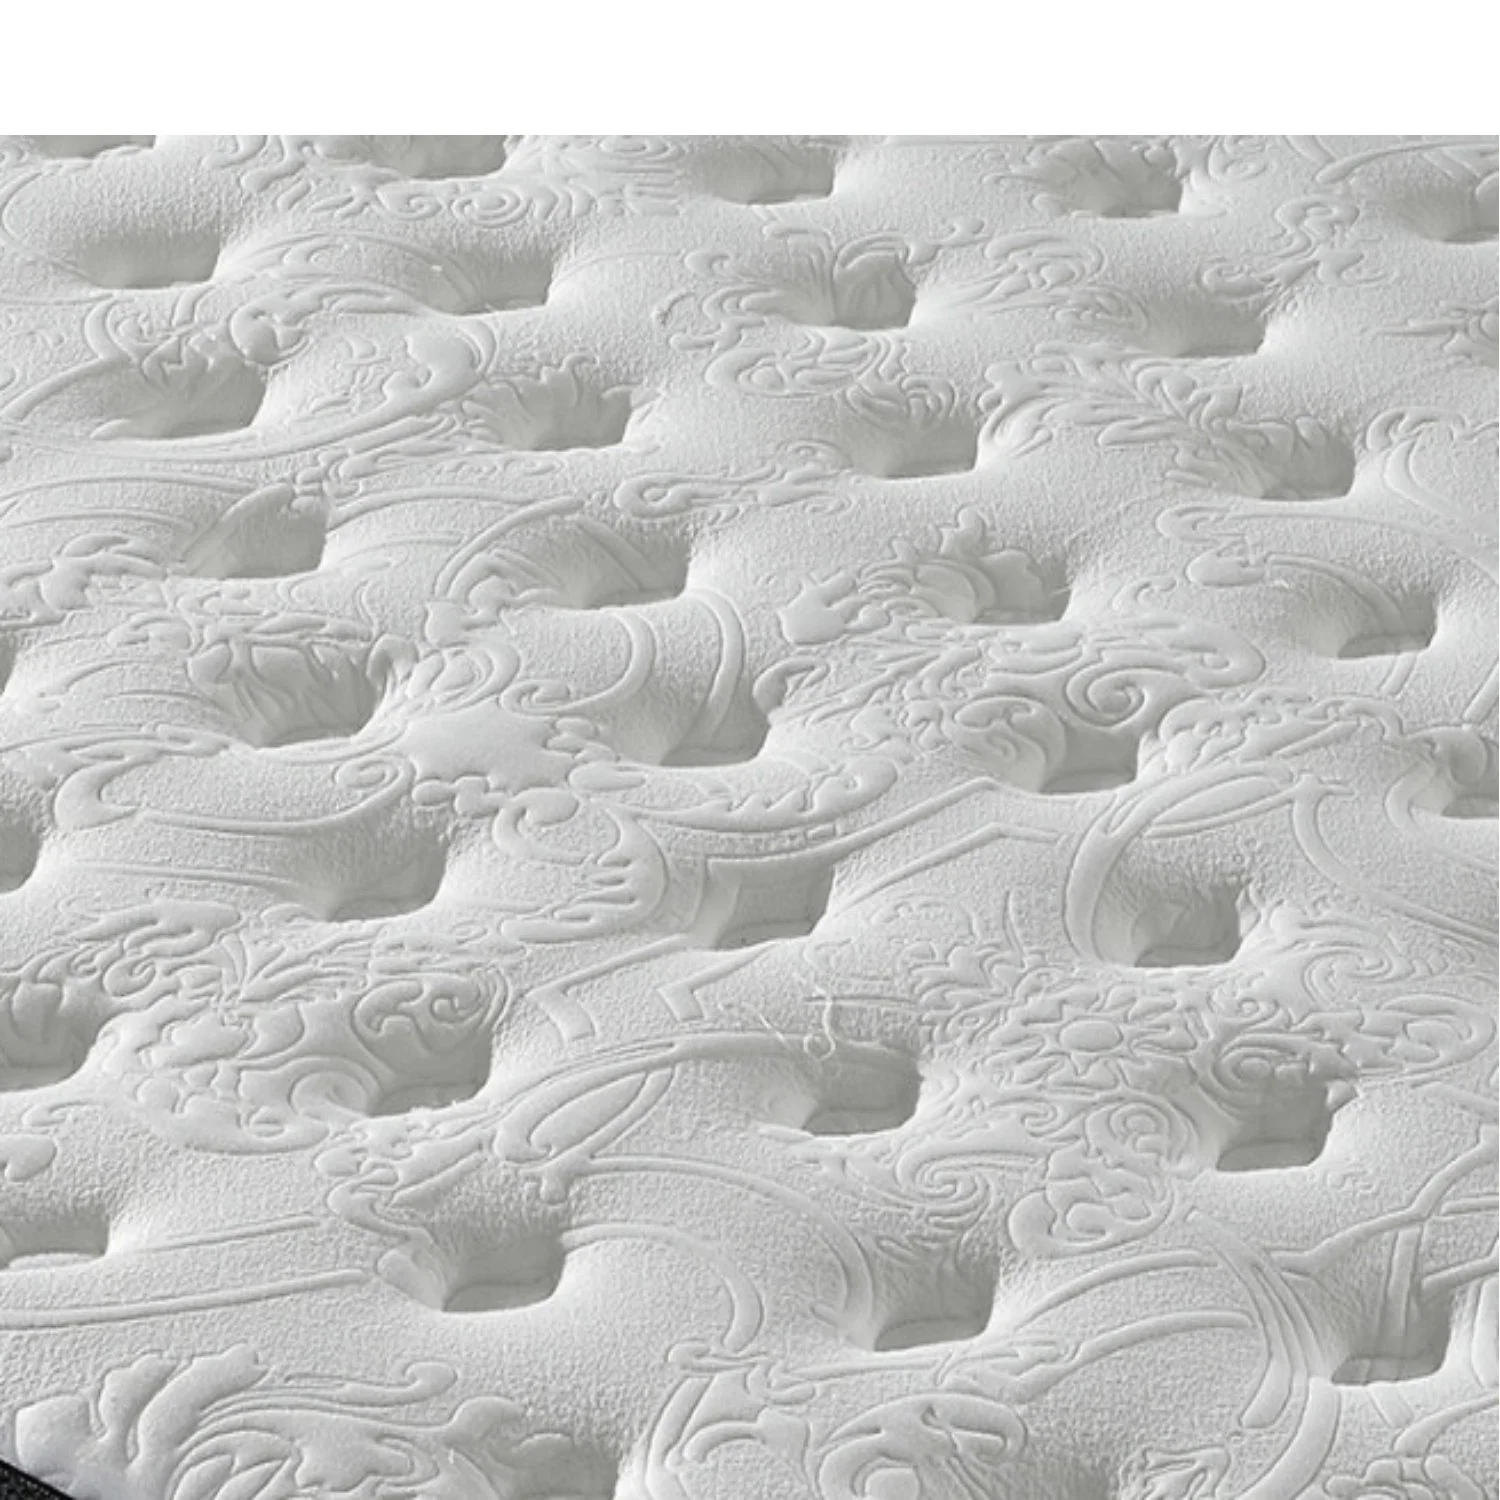 Luxury Latex Cool Gel Memory Foam Mattress 10 Inch and 12 Inch Queen Size and King Size